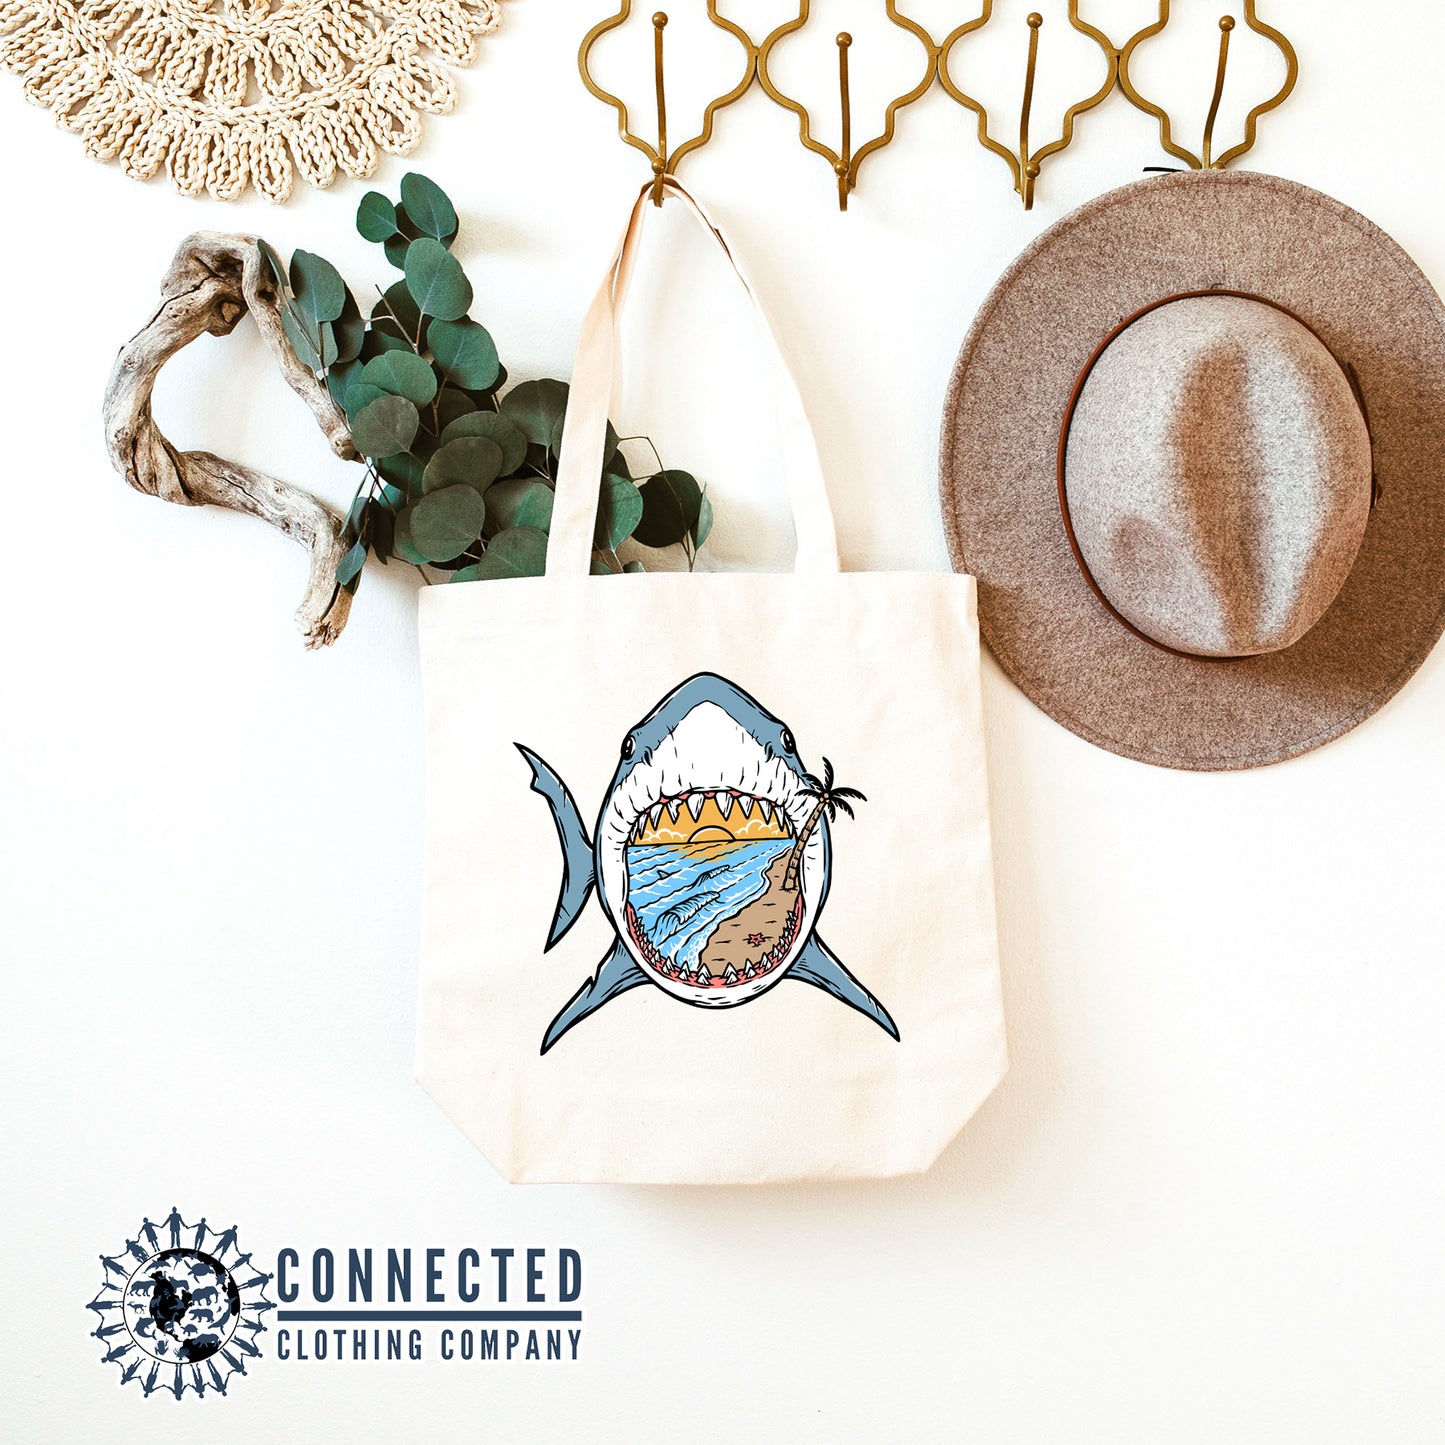 Shark Jaws Beach Tote Bag - Connected Clothing Company - 10% of proceeds donated to shark conservation